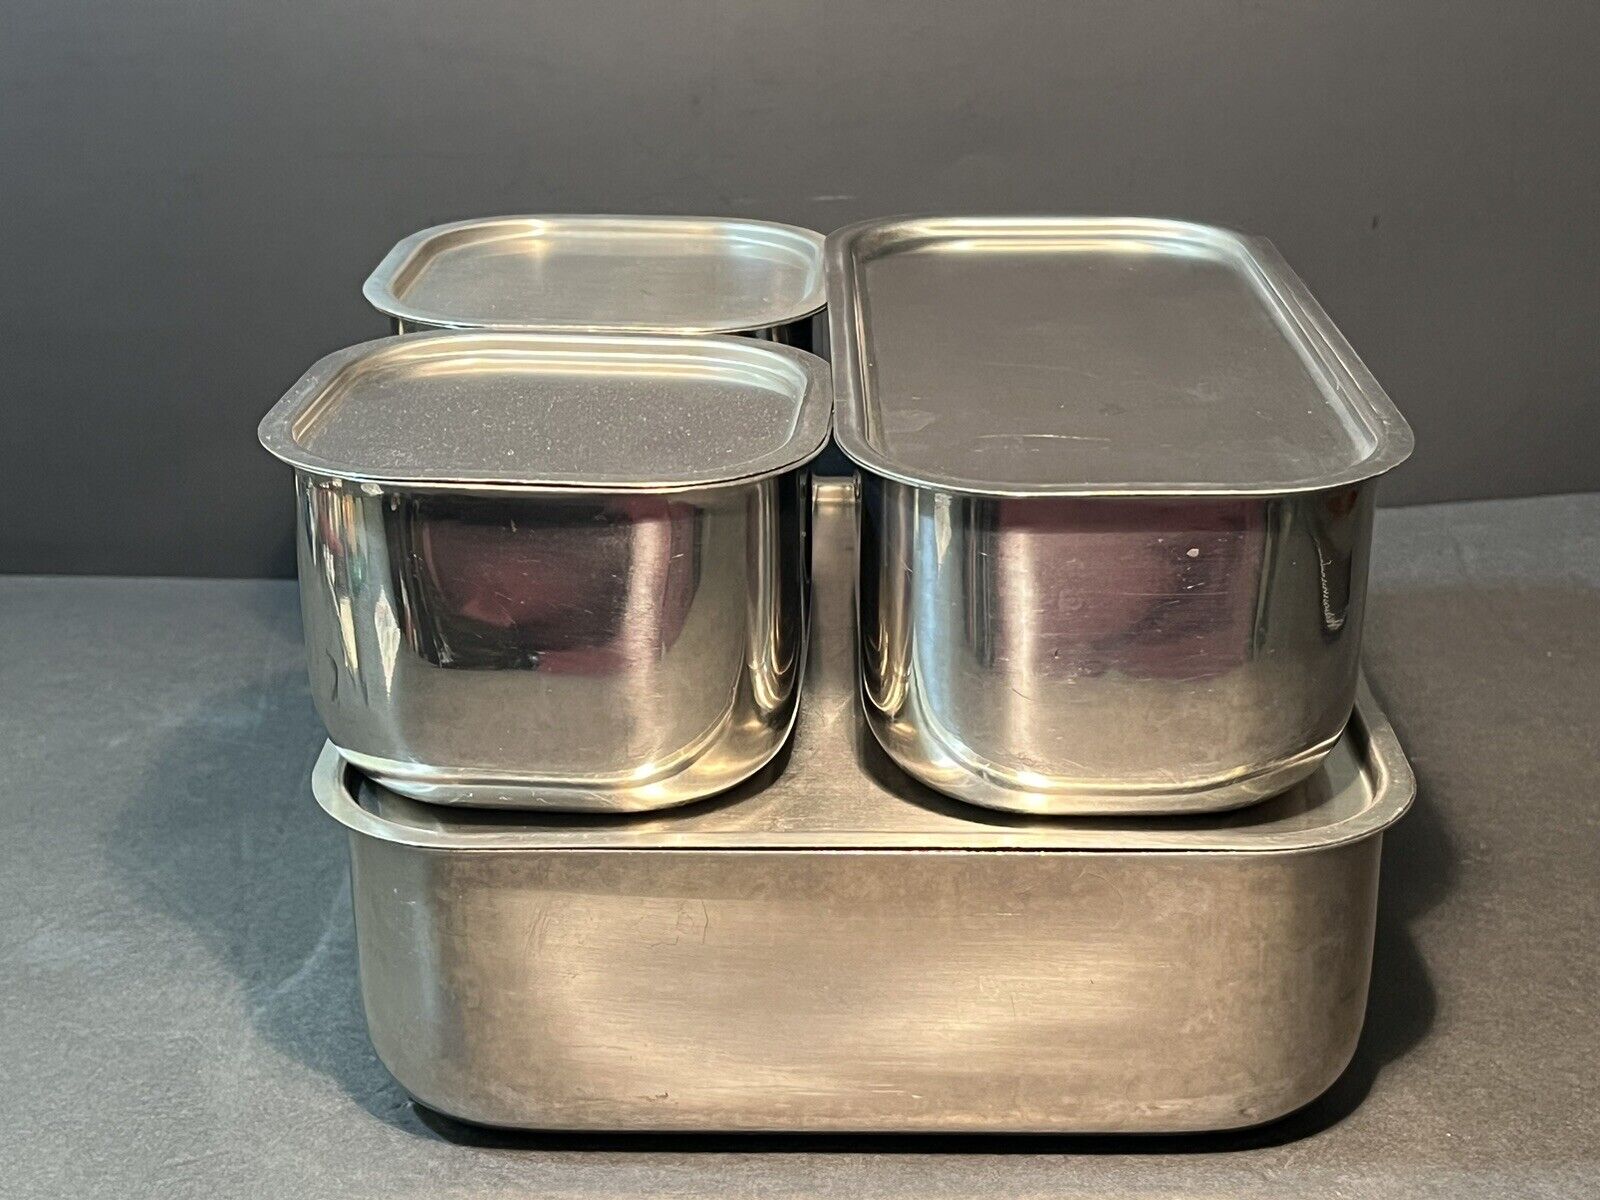 Vtg Vollrath Stainless Steel Ware Refrigerator Dishes FOOD Storage Containers 4